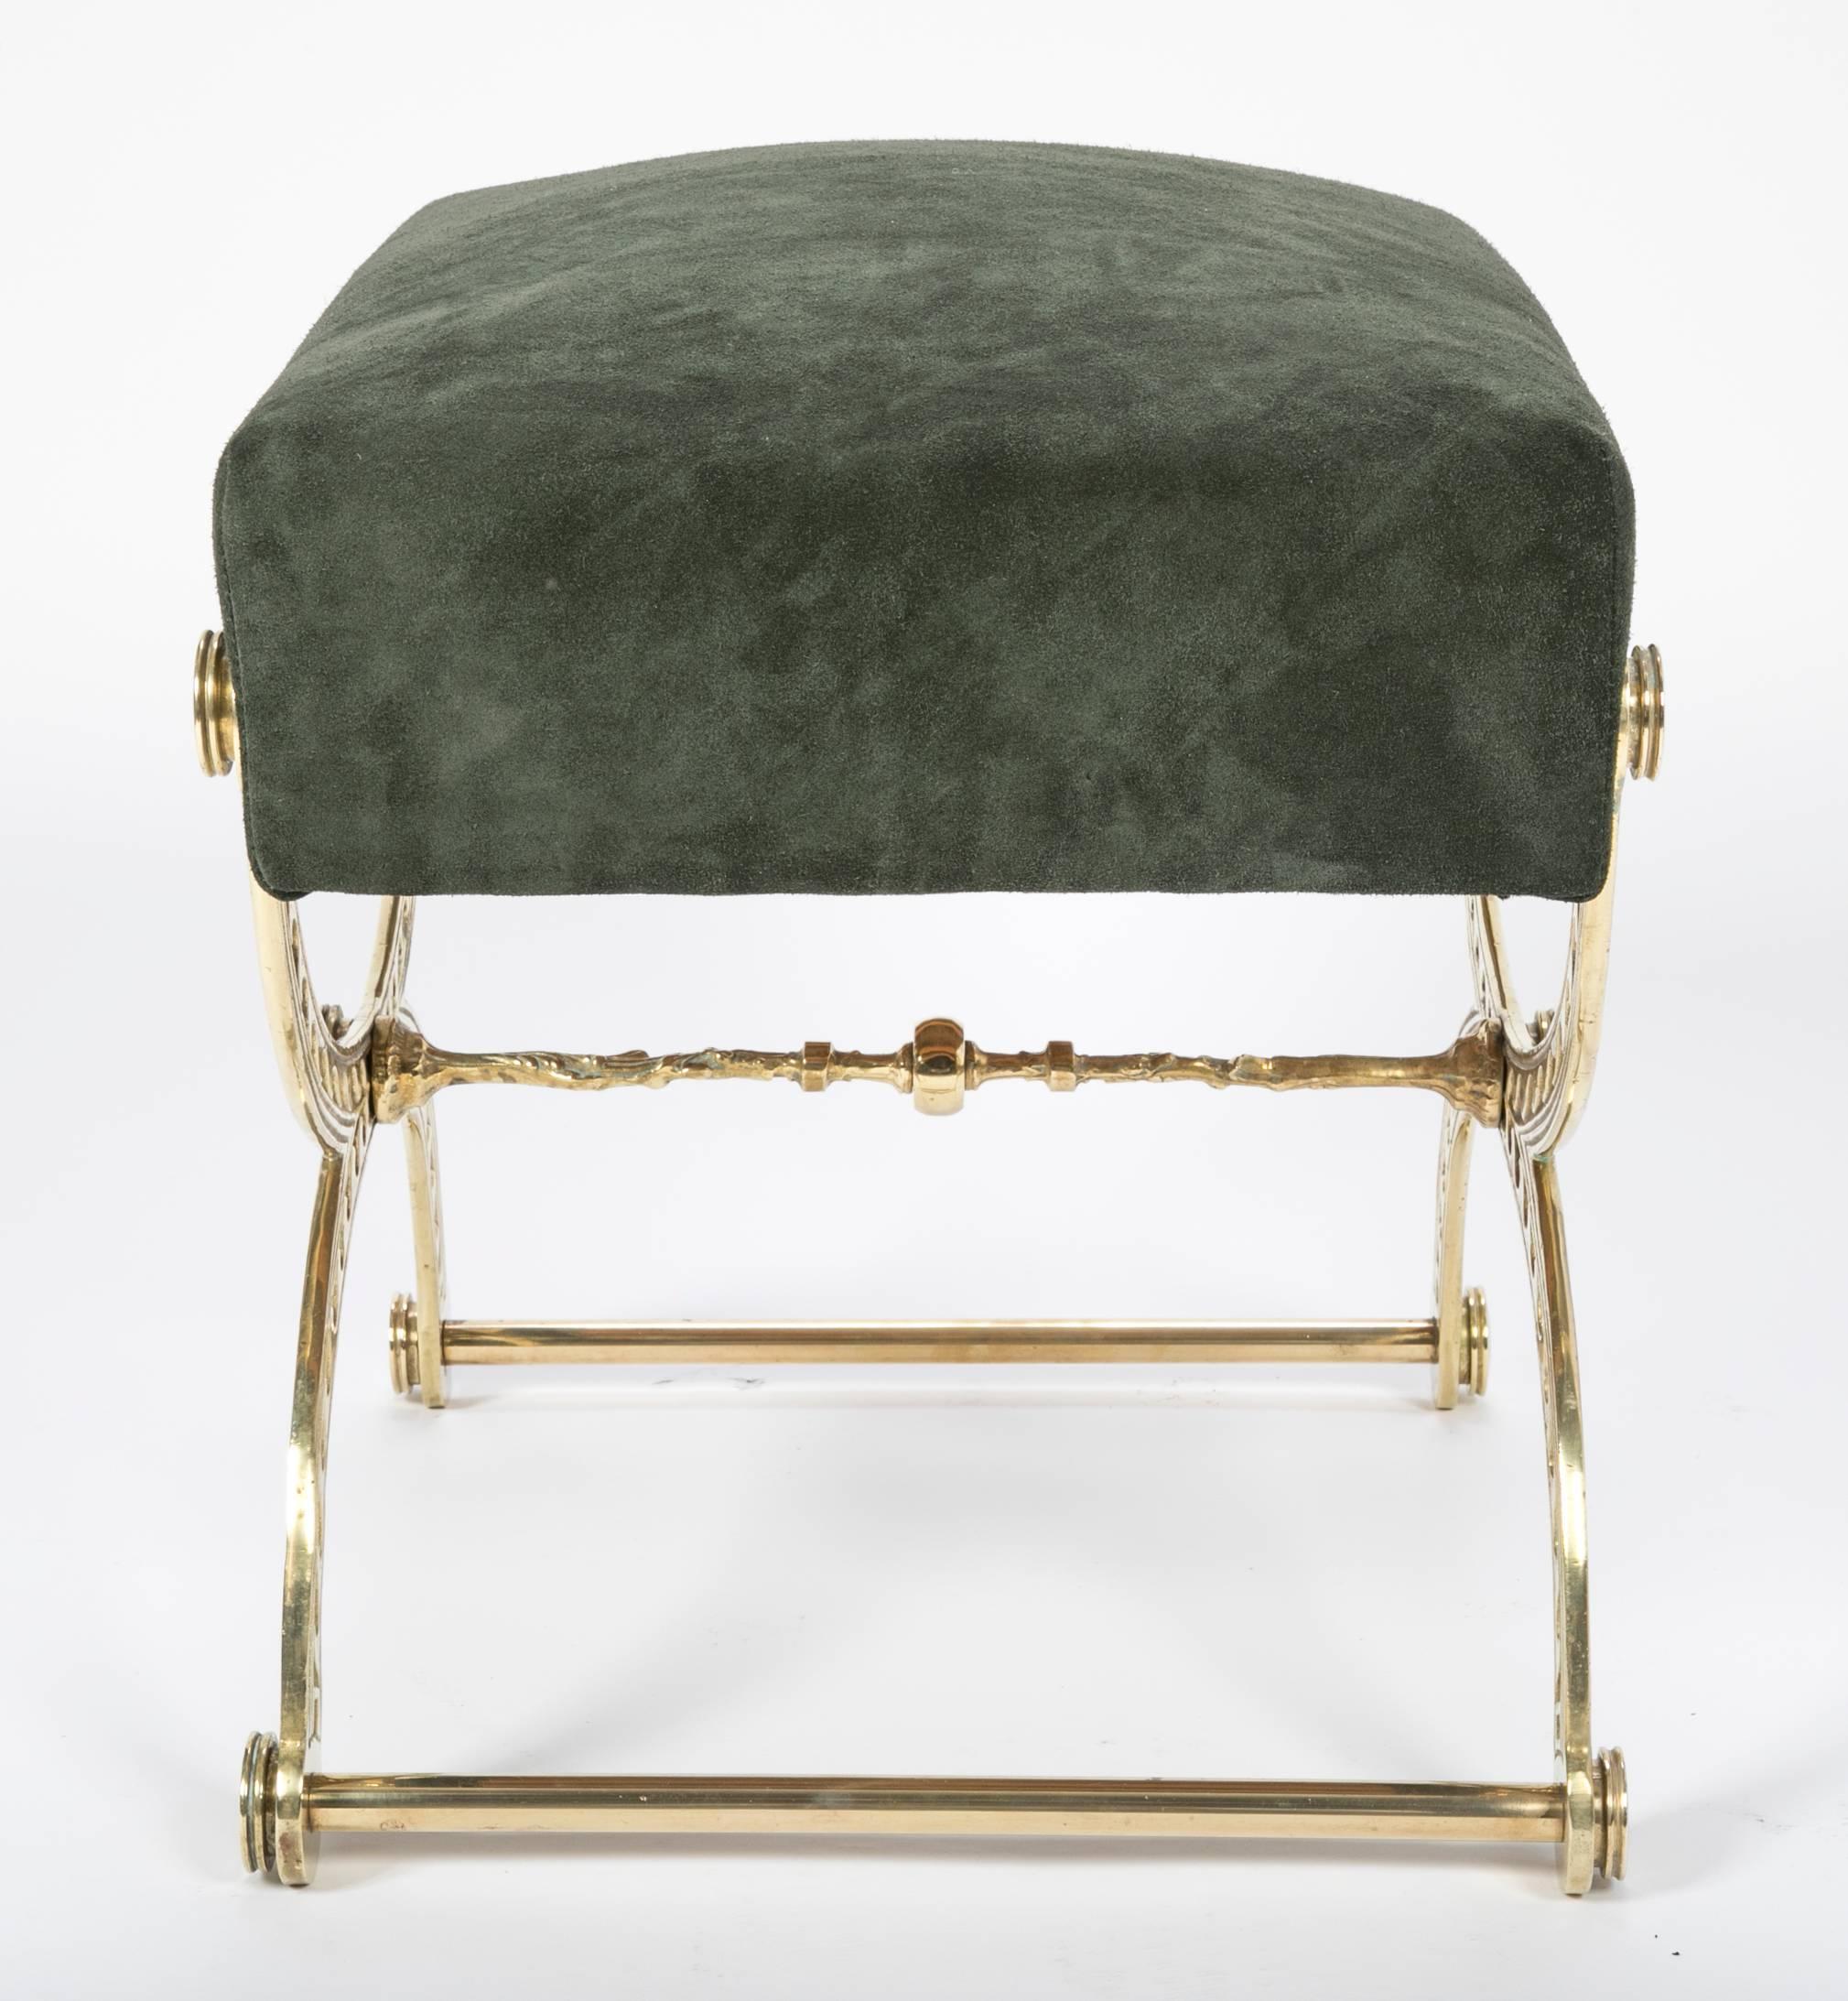 A Brass and Suede Cerule form Stool with Vitruvian wave decoration. Newly upholstered in Green suede. 